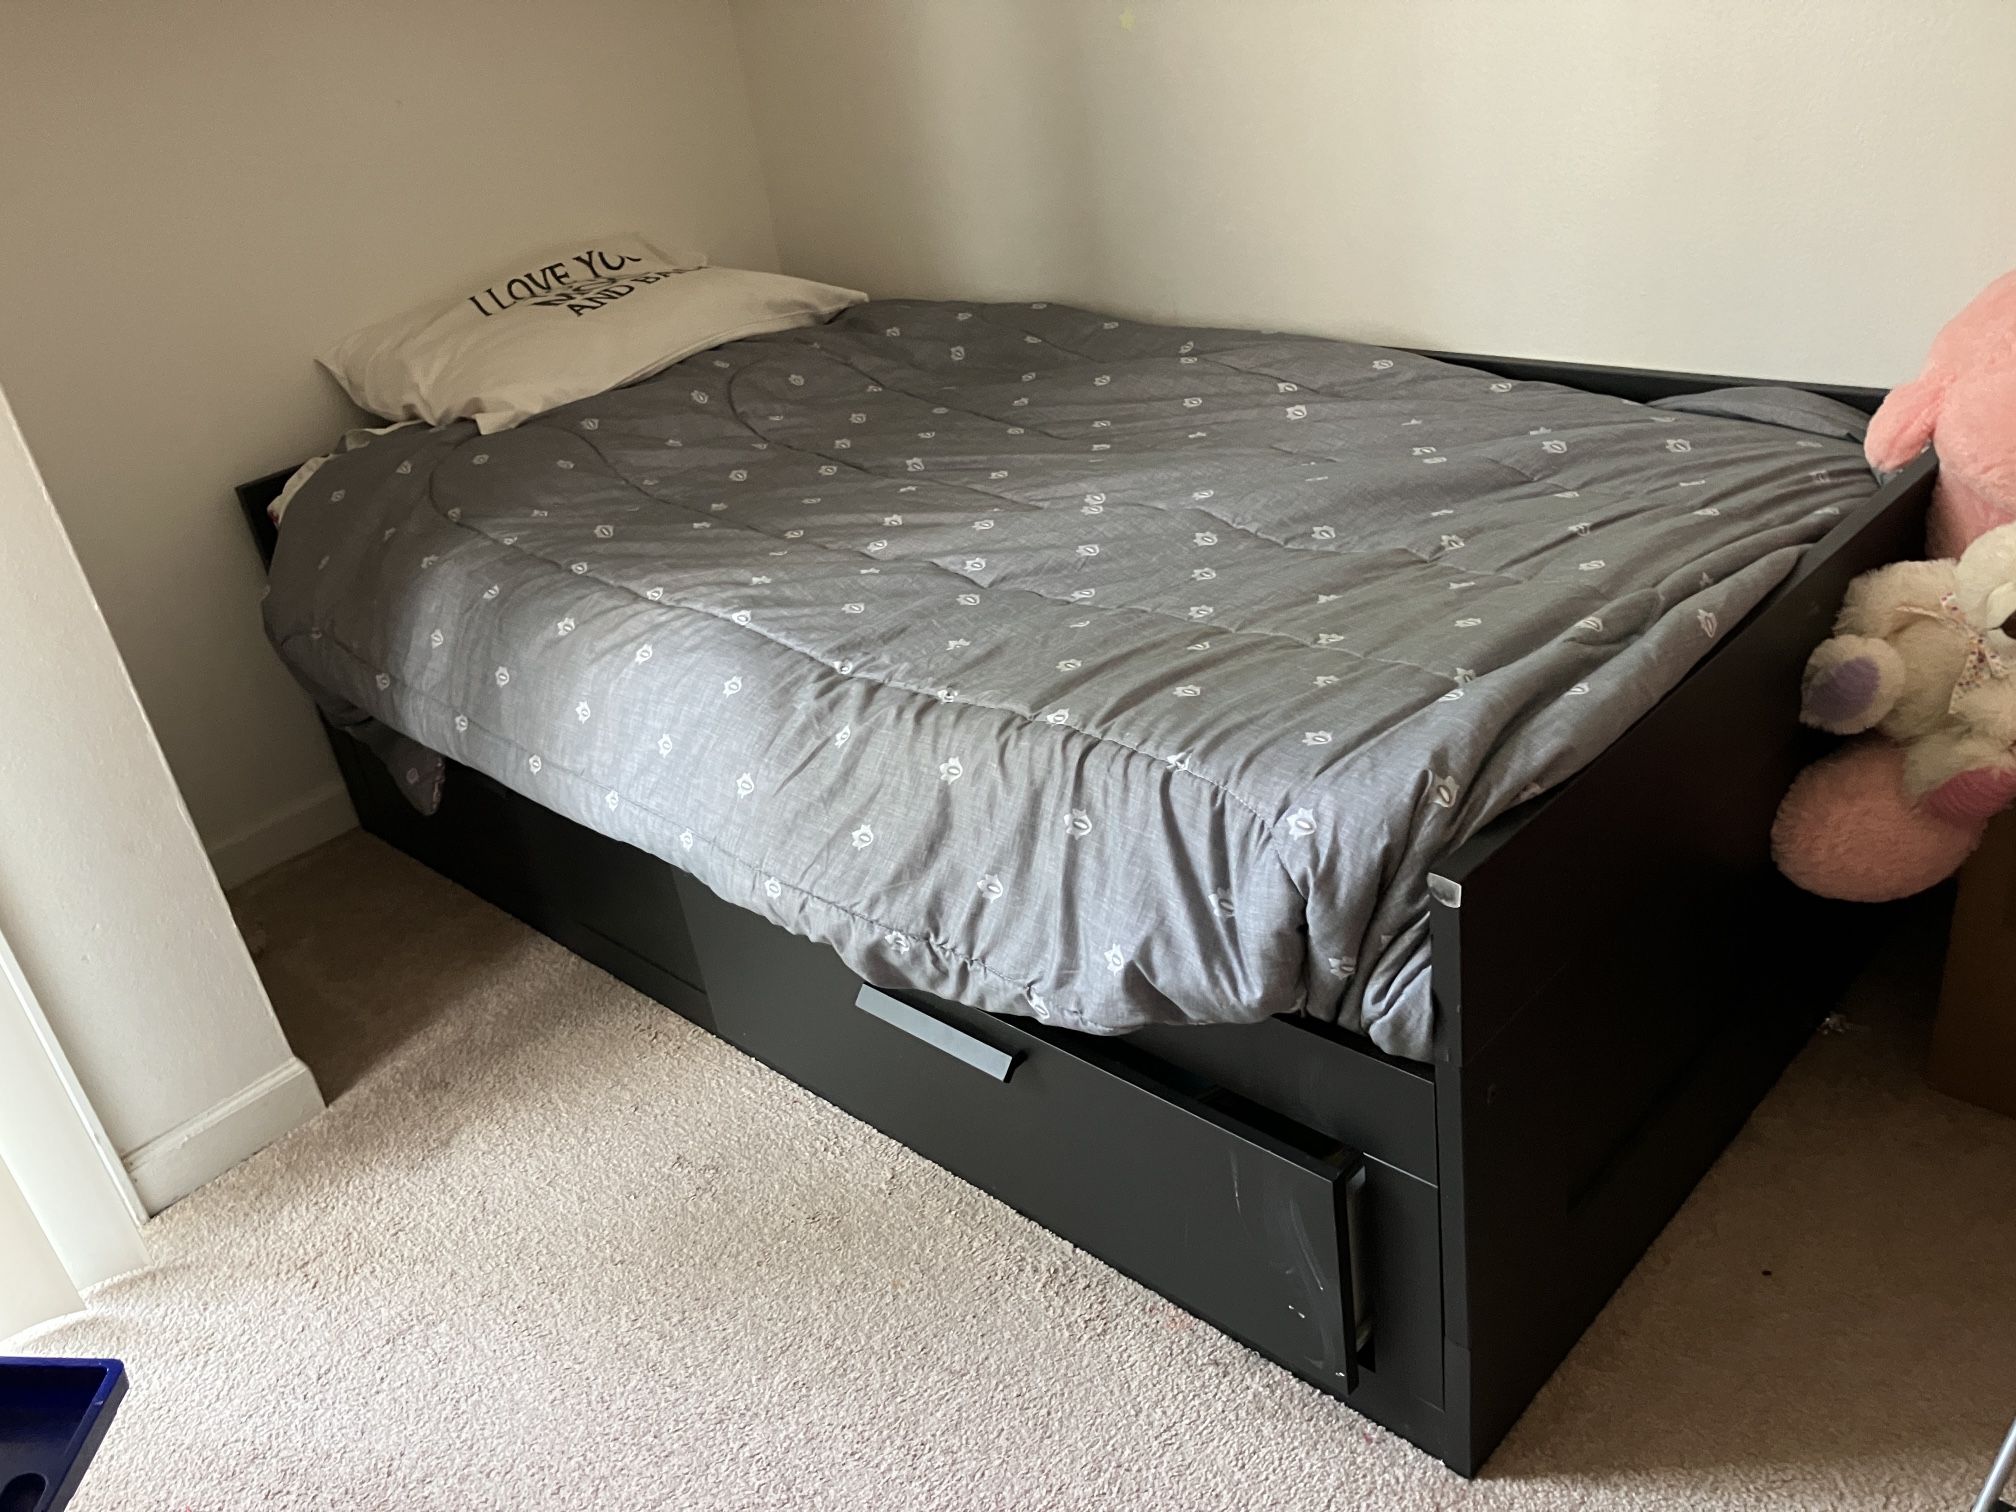 Twin Bed With Storage